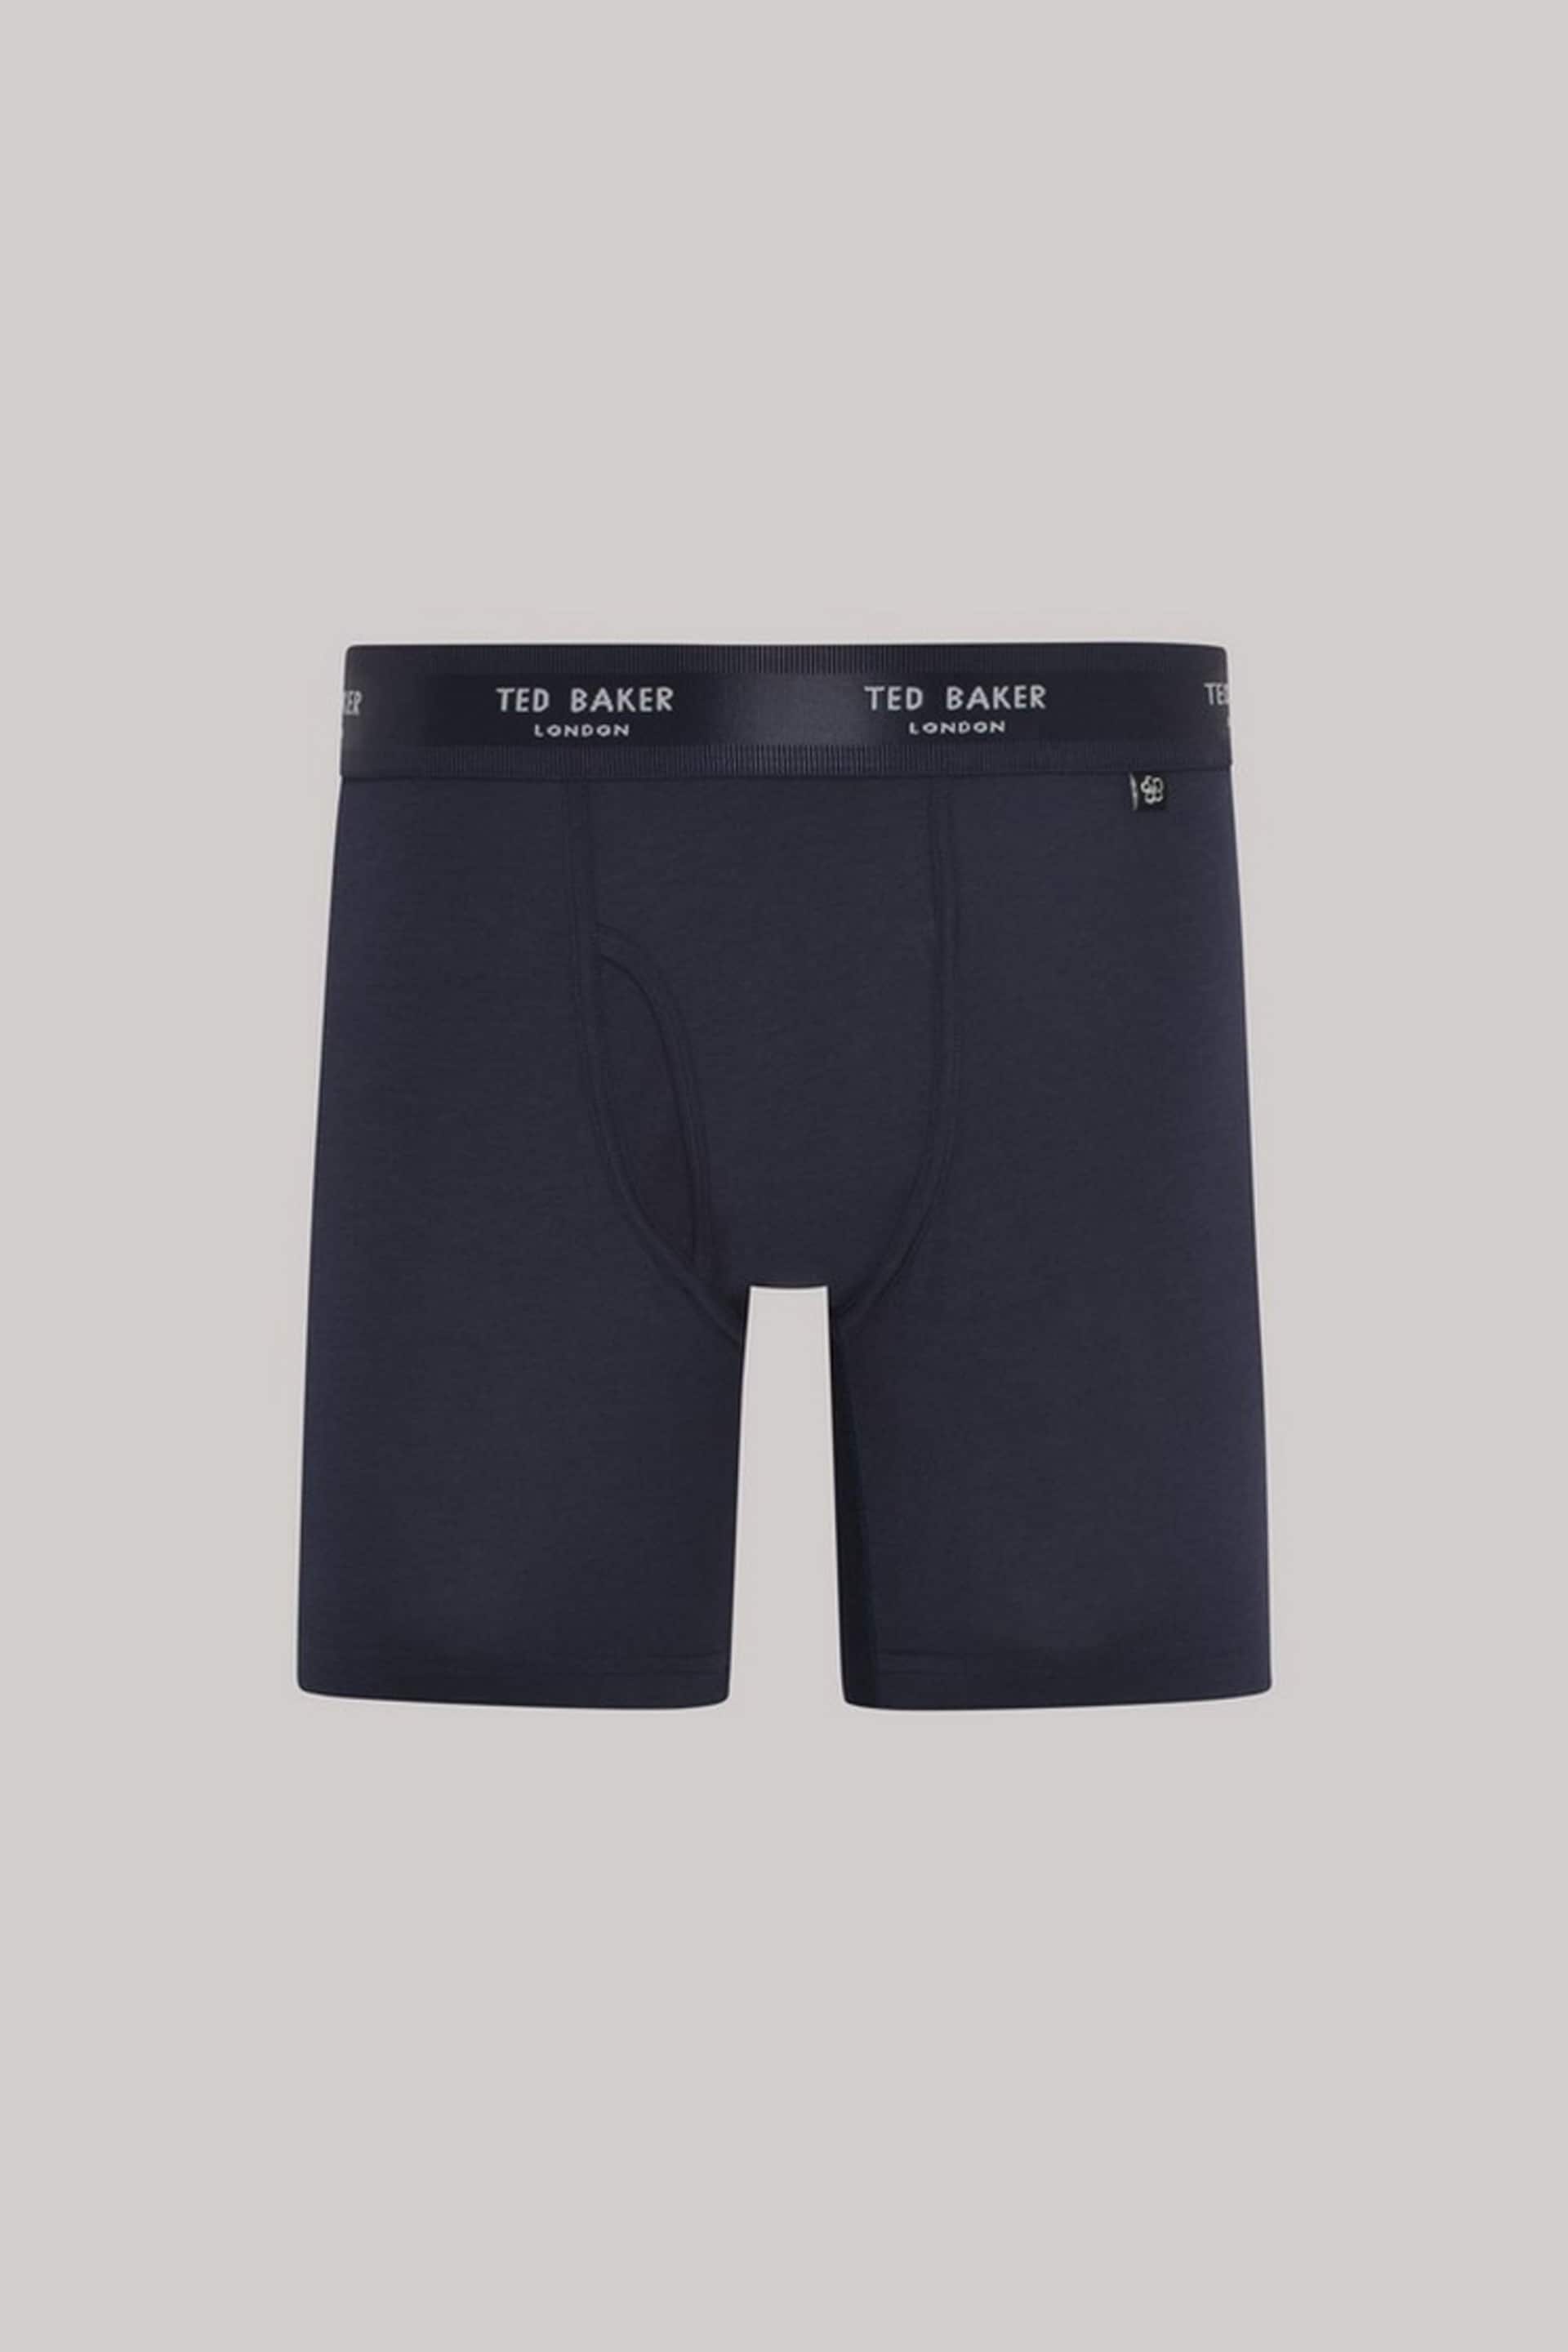 Ted Baker Blue Cotton Boxer Briefs 3 Pack - Image 2 of 2